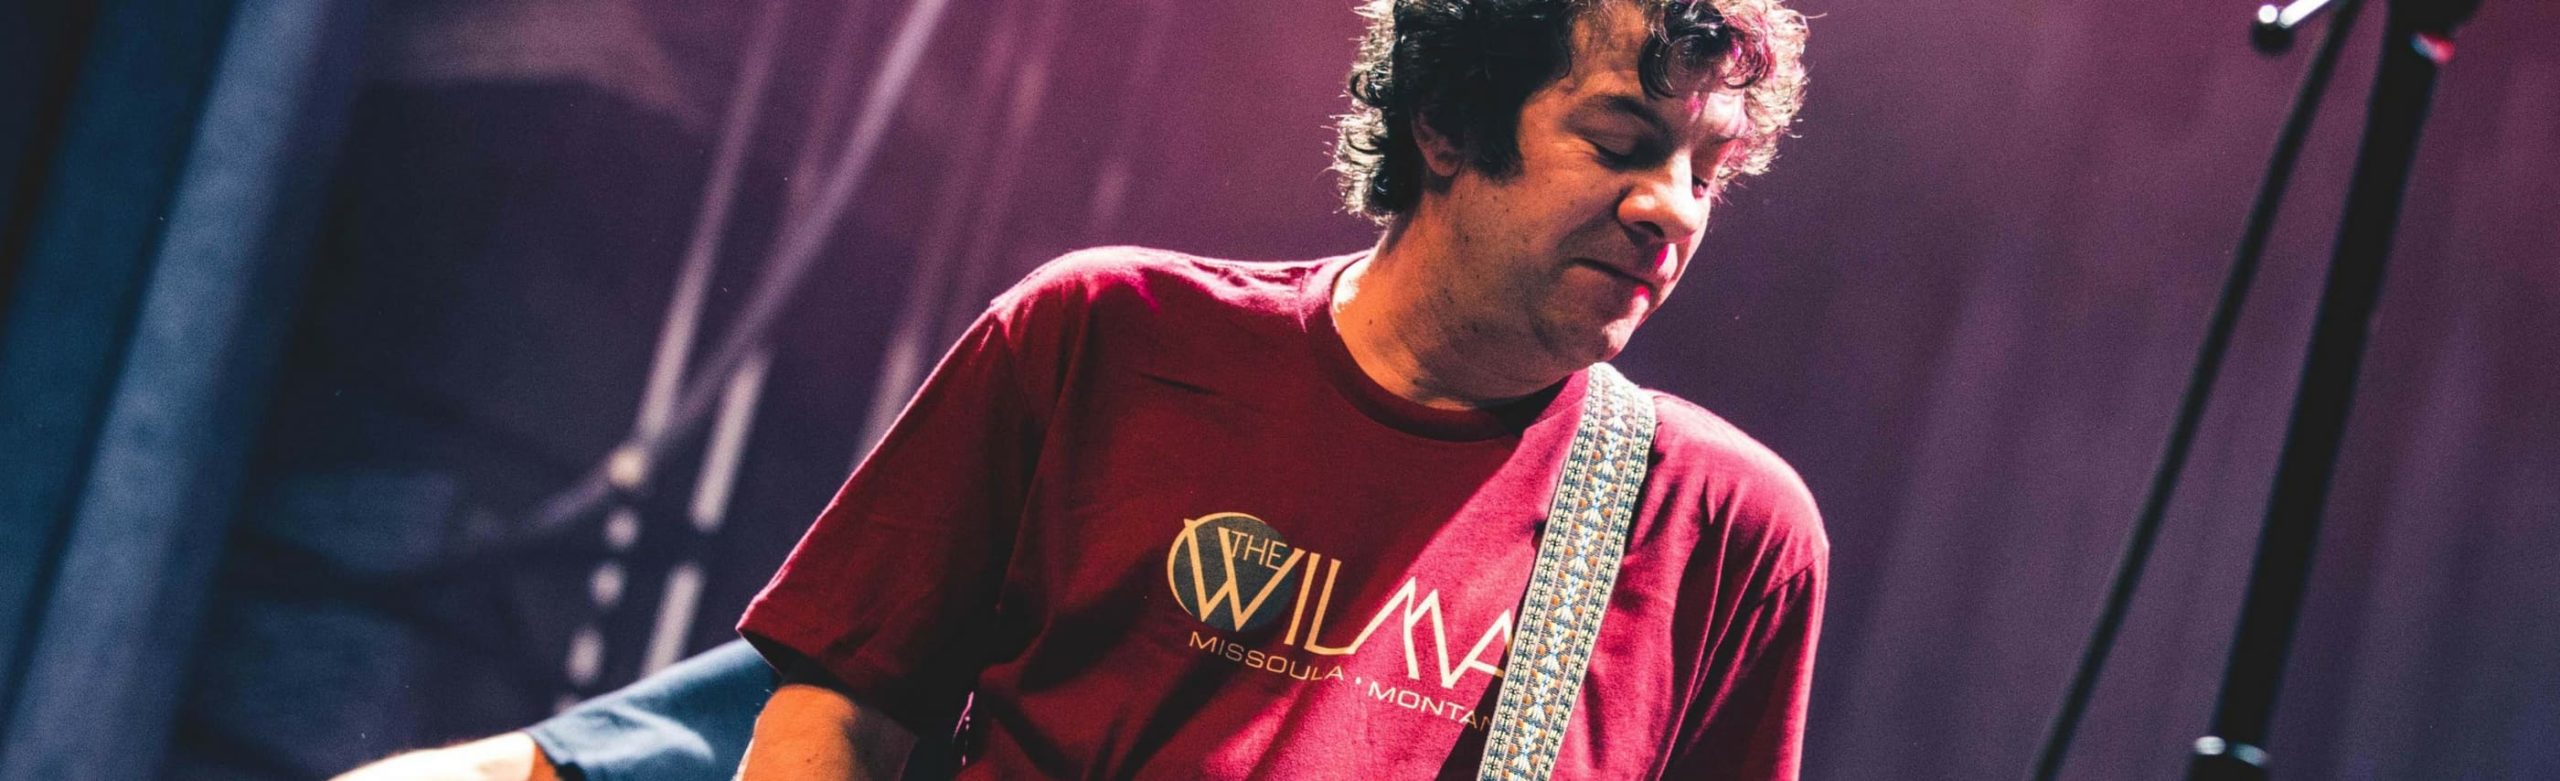 JUST ANNOUNCED: Dean Ween Group Announces Concert in Missoula Image